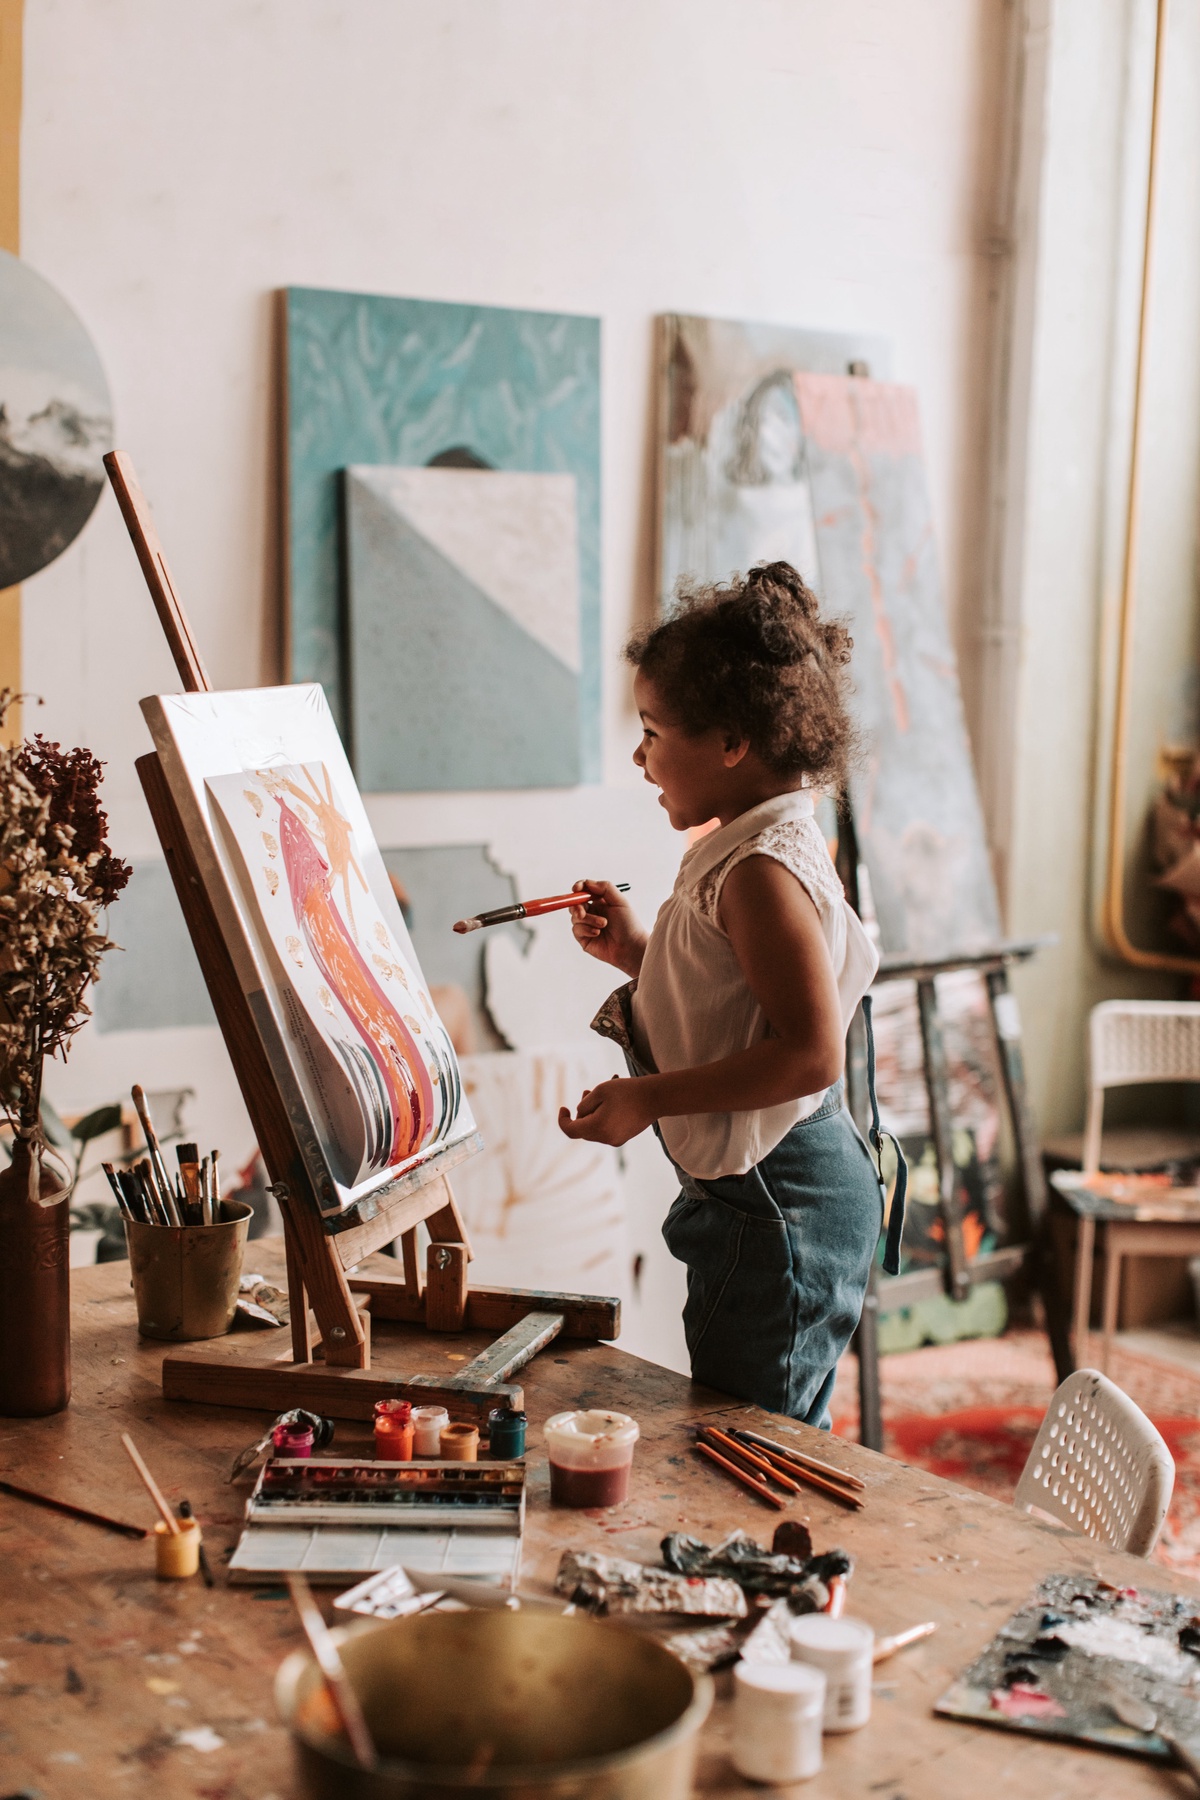 Cultivating Genius, The Importance of Creativity in Early Years